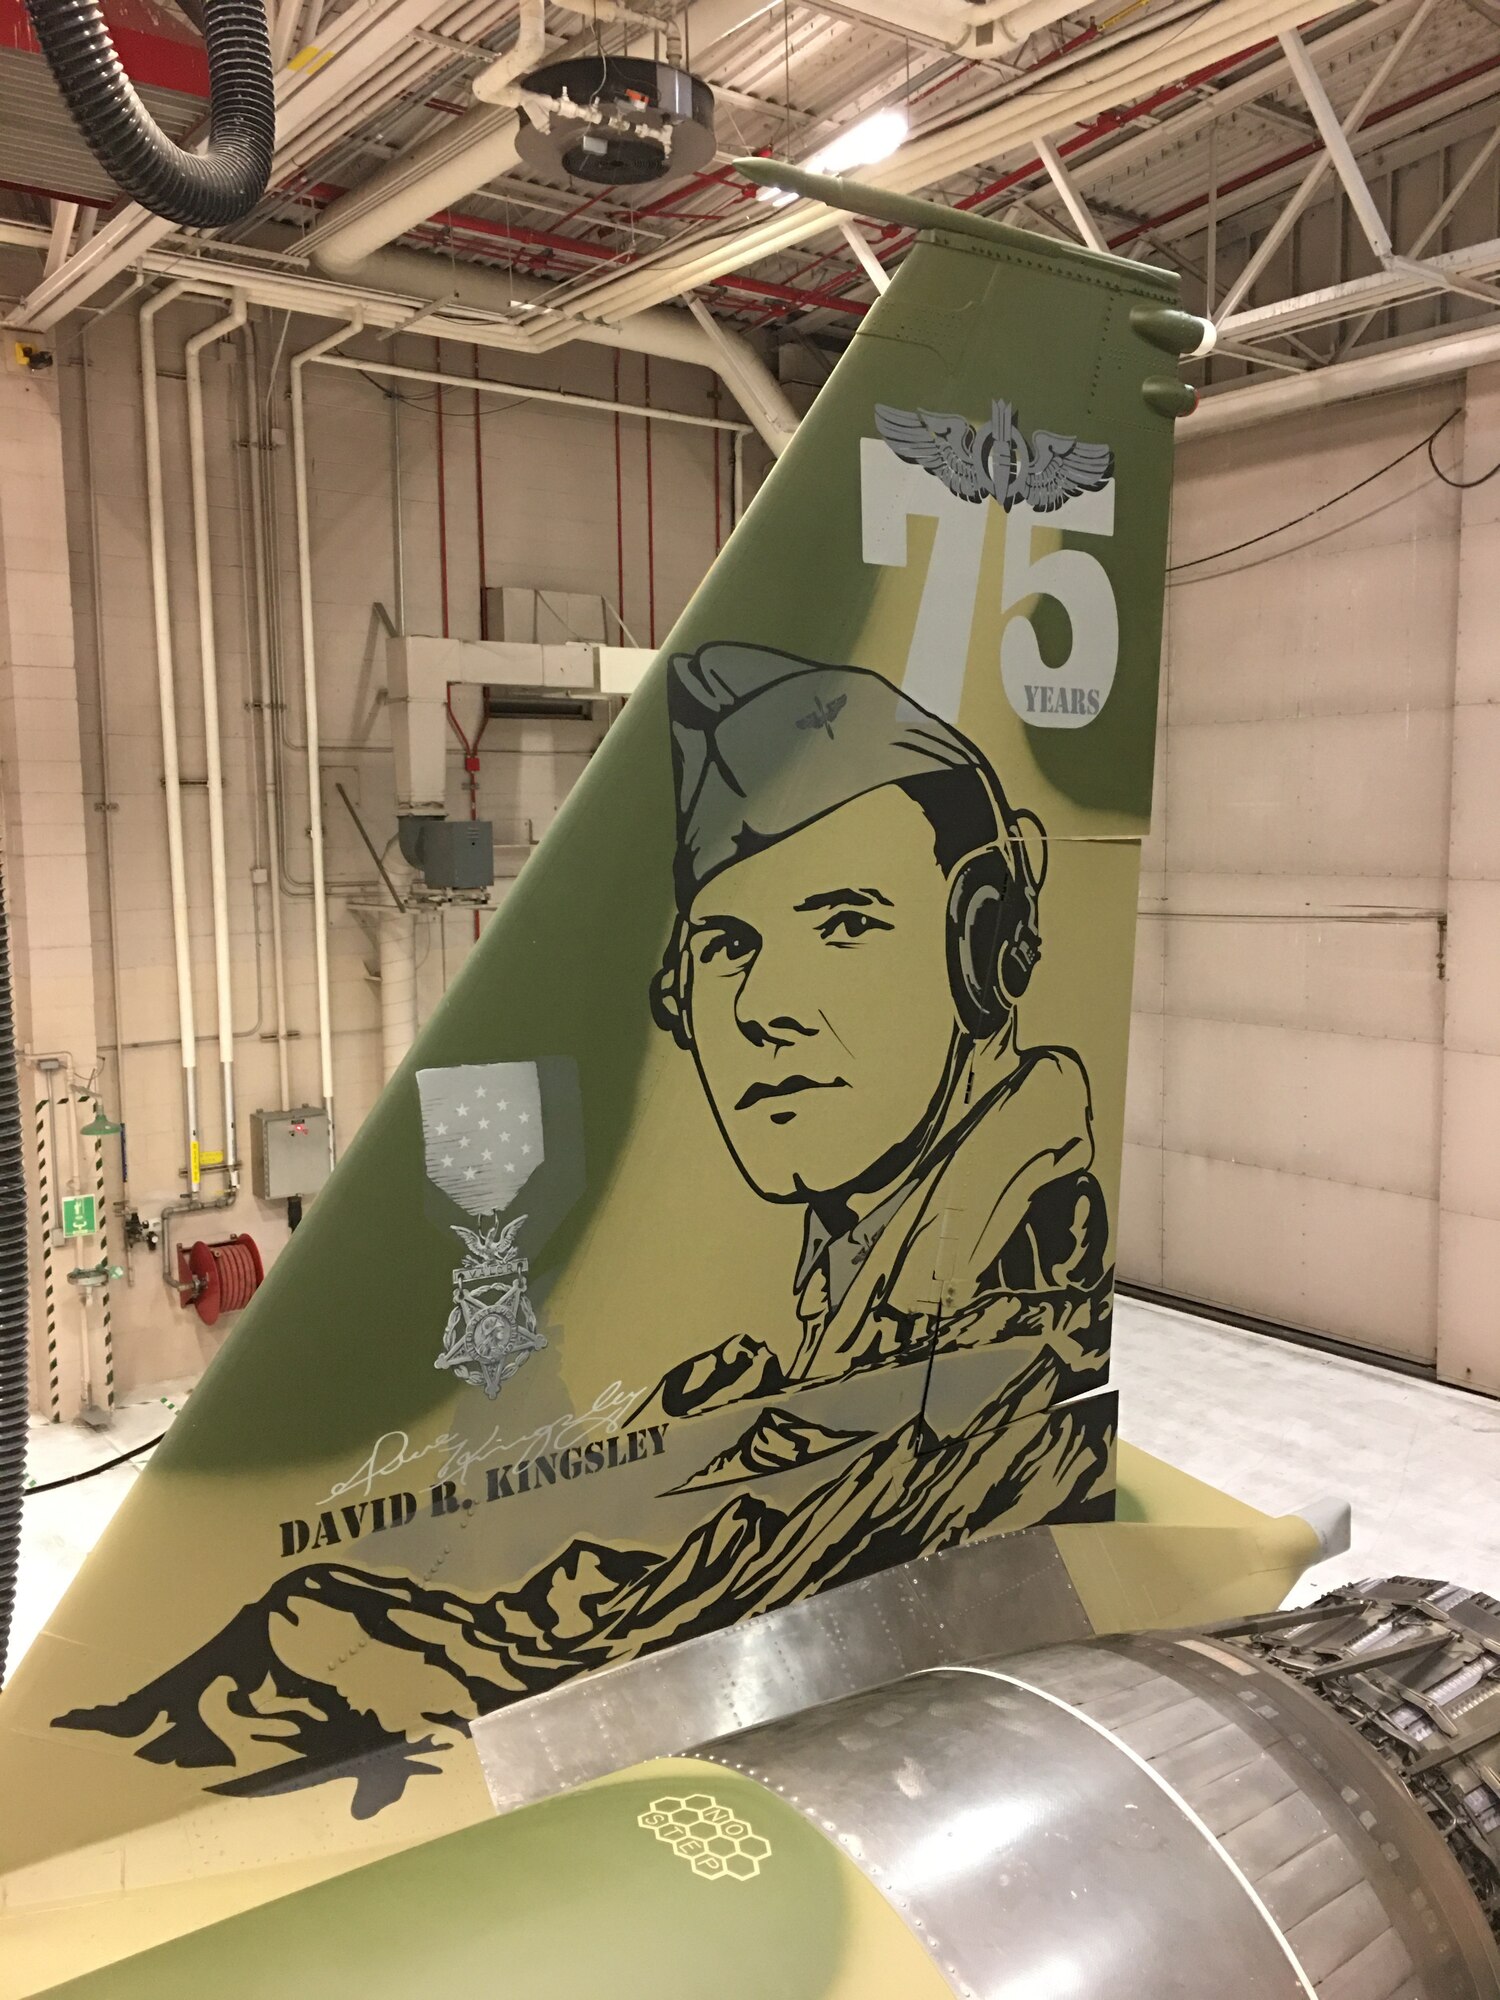 The vertical tail of an F-15 Eagle, assigned to the 173rd Fighter Wing, Oregon Air National Guard, bears an image of Lt. David R. Kingsley, who received the Medal of Honor for heroism during WWII, which cost him his life. This new flagship pays homage to the Oregon native and Kingsley Field's heritage. (U.S. Air National Guard photo by Master Sgt. Paul Allen)